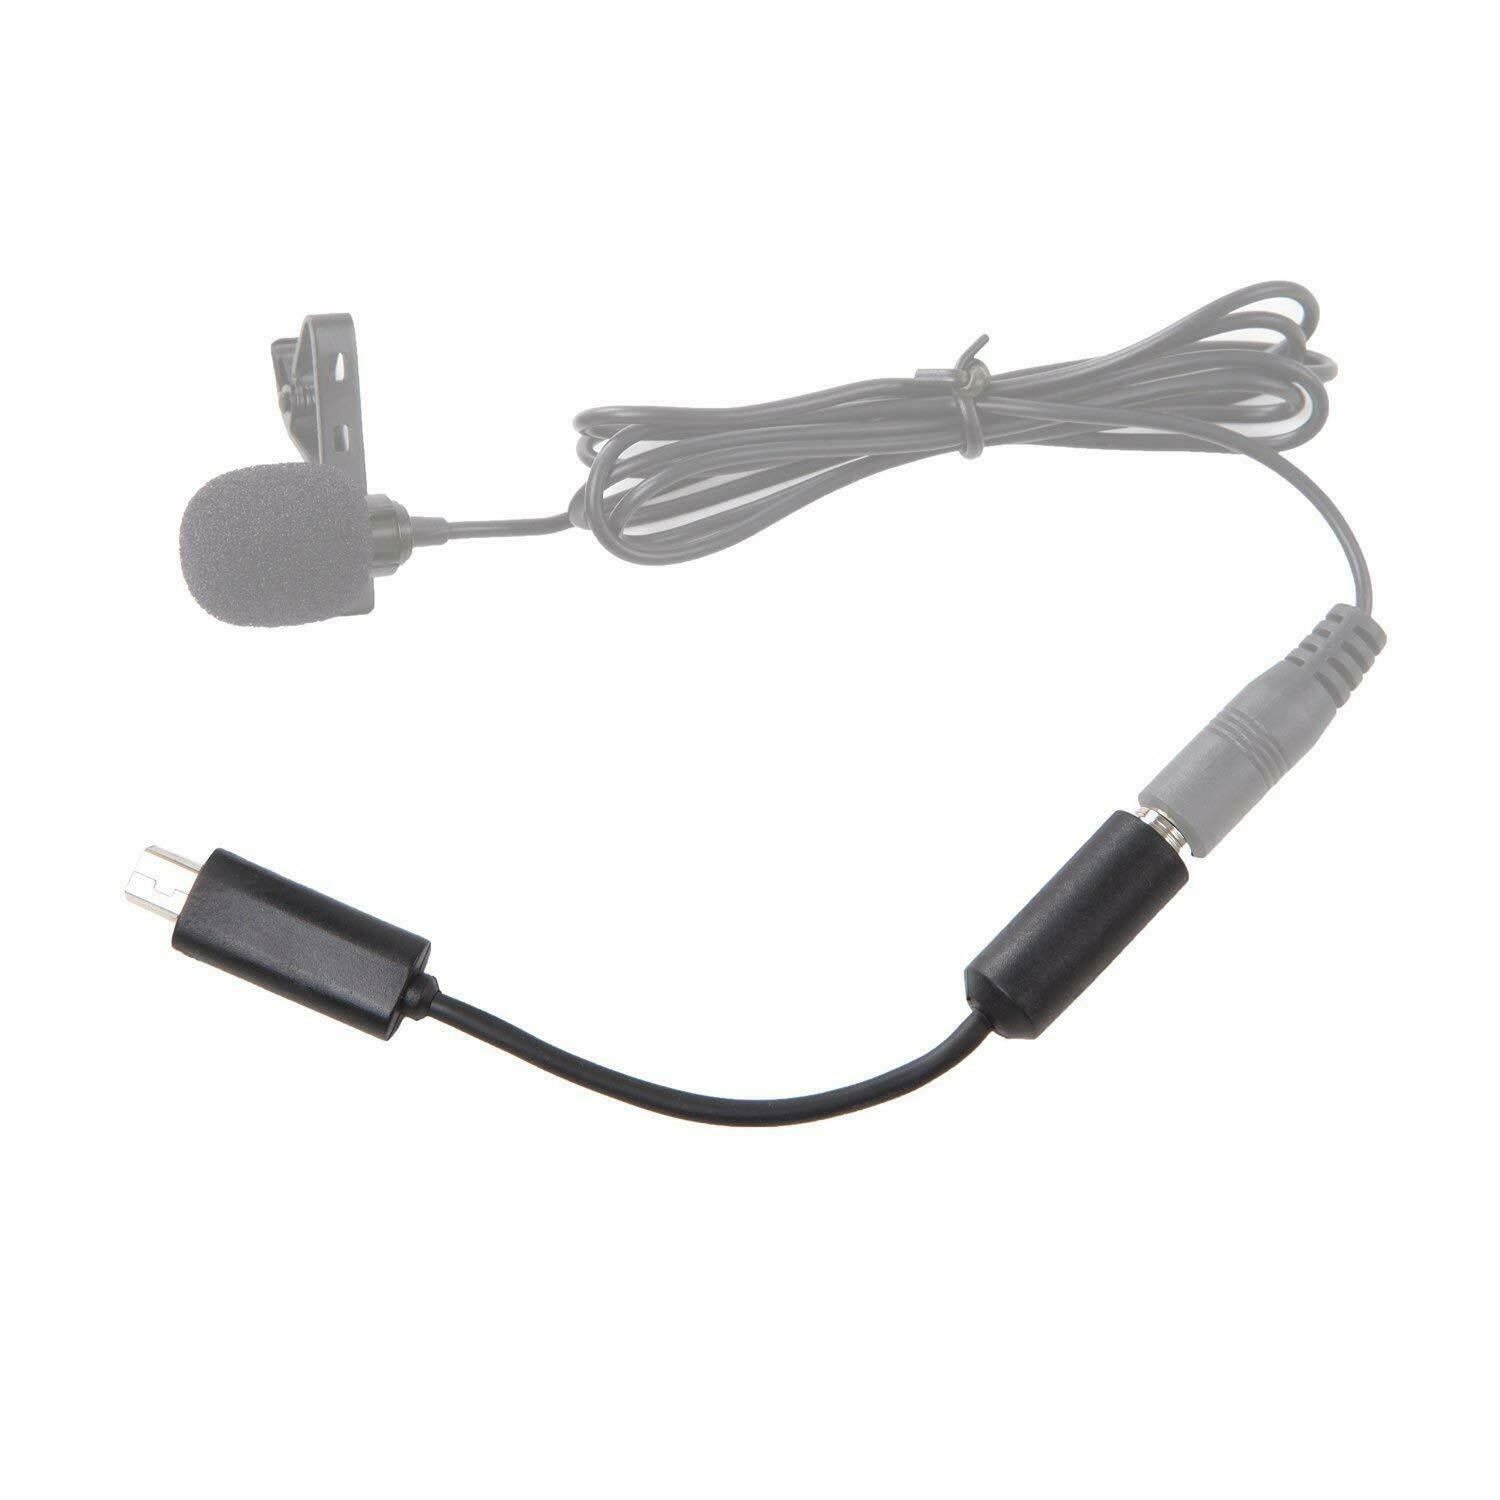 Microphone Adapter Cable for GoPro Hero 3 3 4 Female 3.5mm Audio Converter Lead